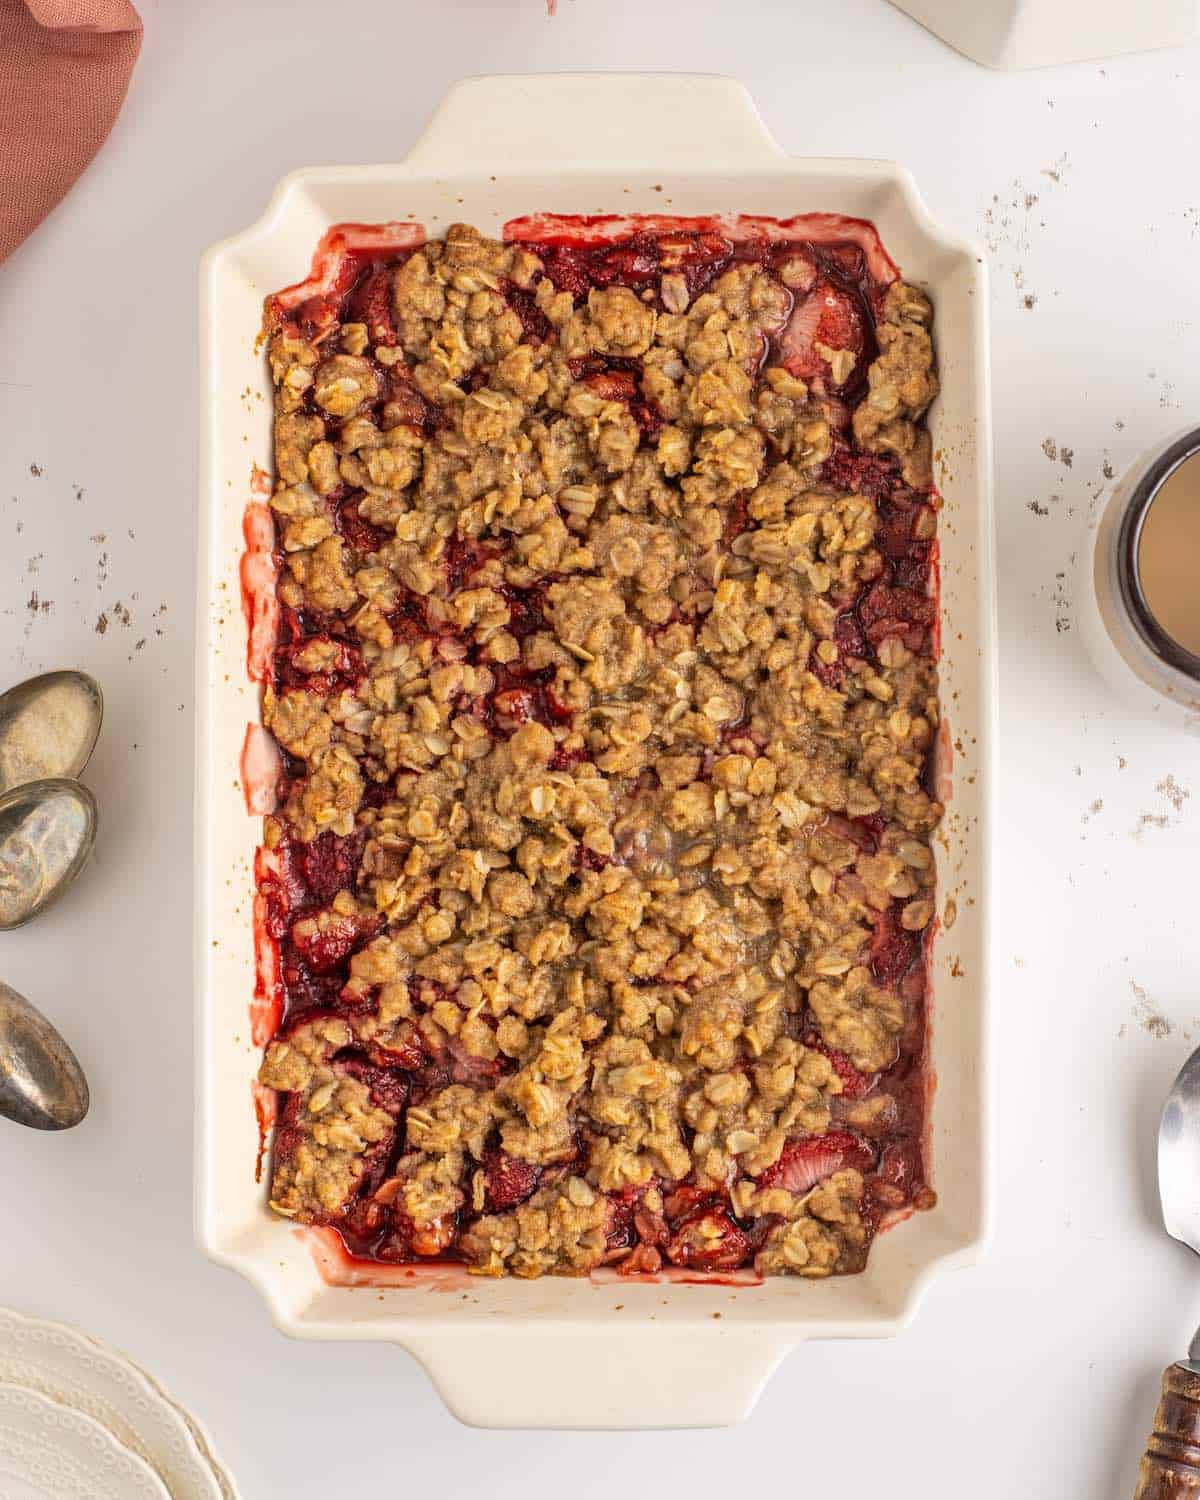 A baked dish of strawberry crumble on a kitchen countertop.